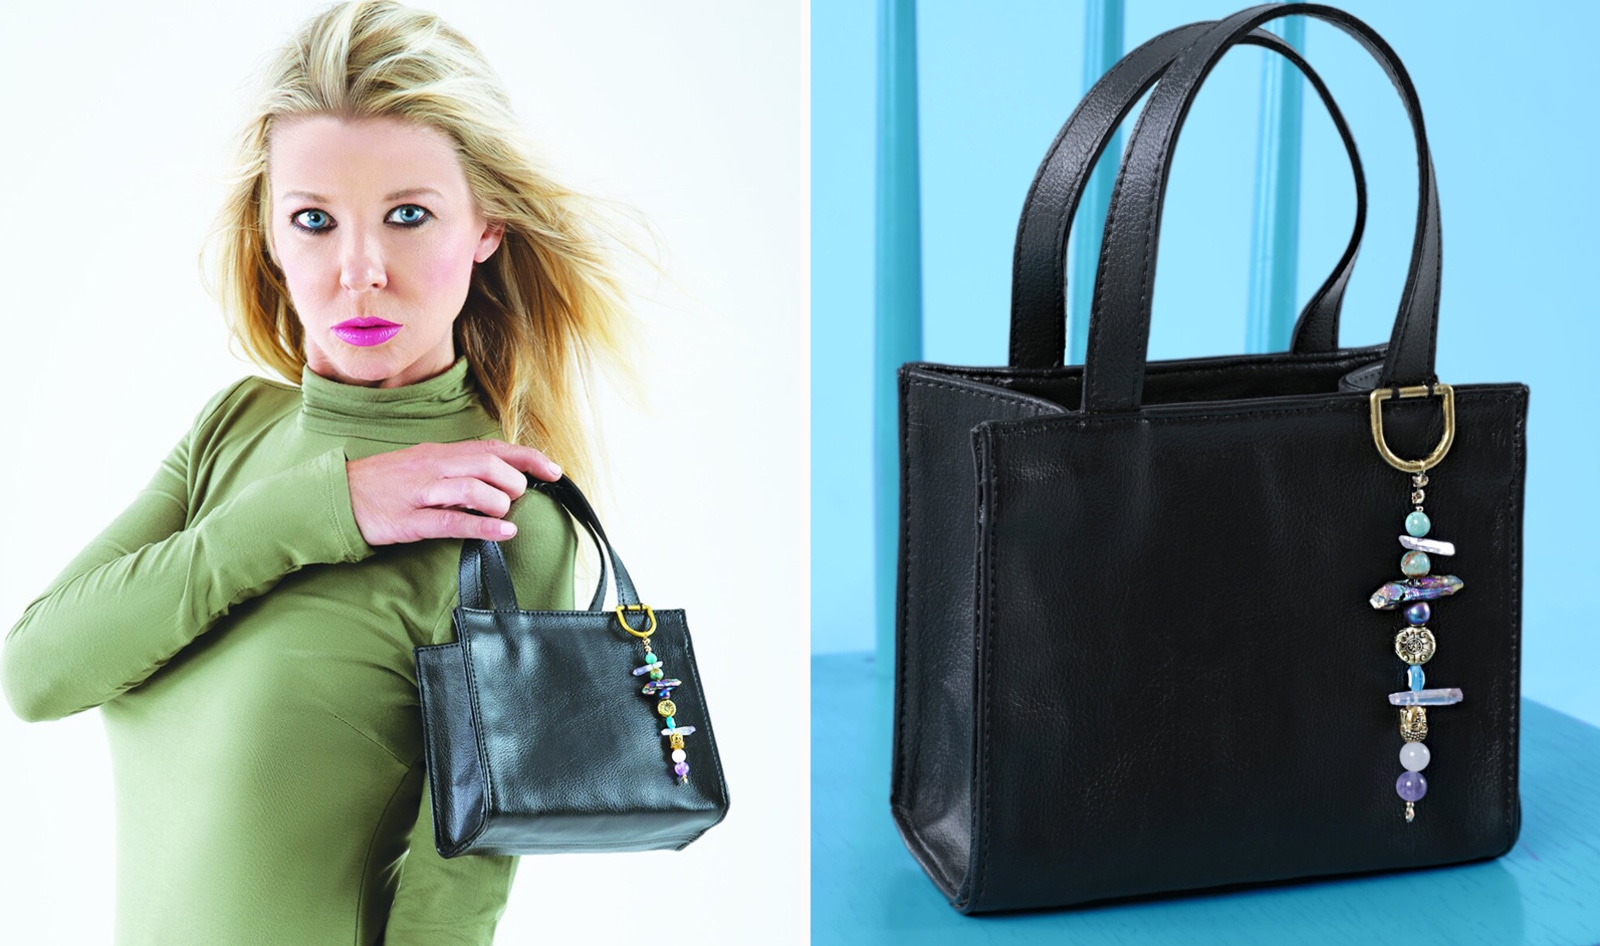 Tara Reid Is Latest Star to Embrace Vegan Cactus Leather with New Bag